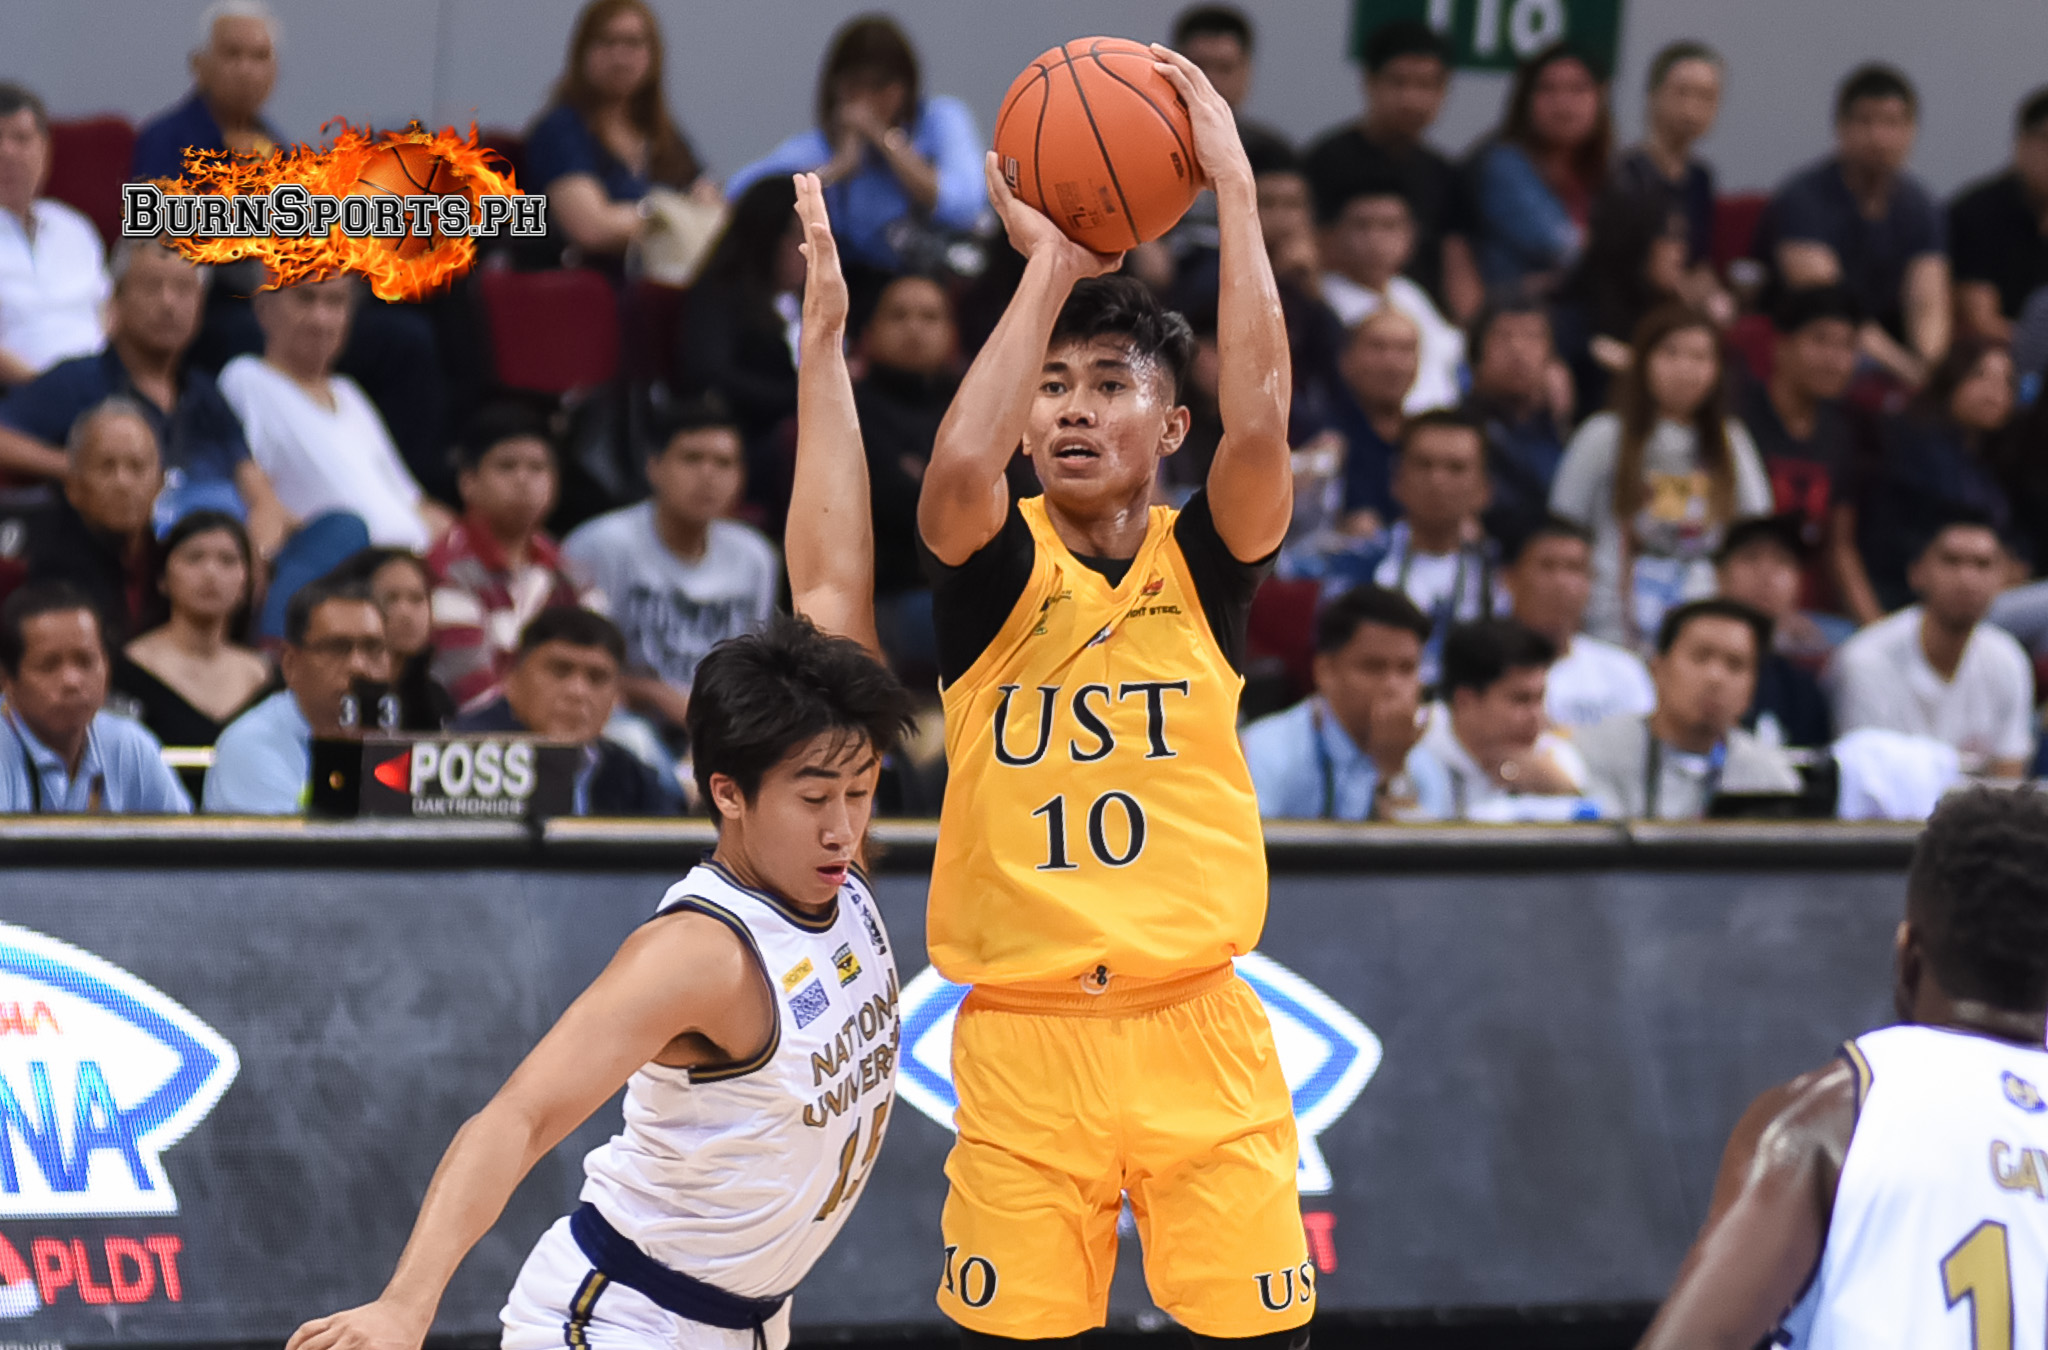 Abando delivers at crunch time as UST edges NU in OT thriller